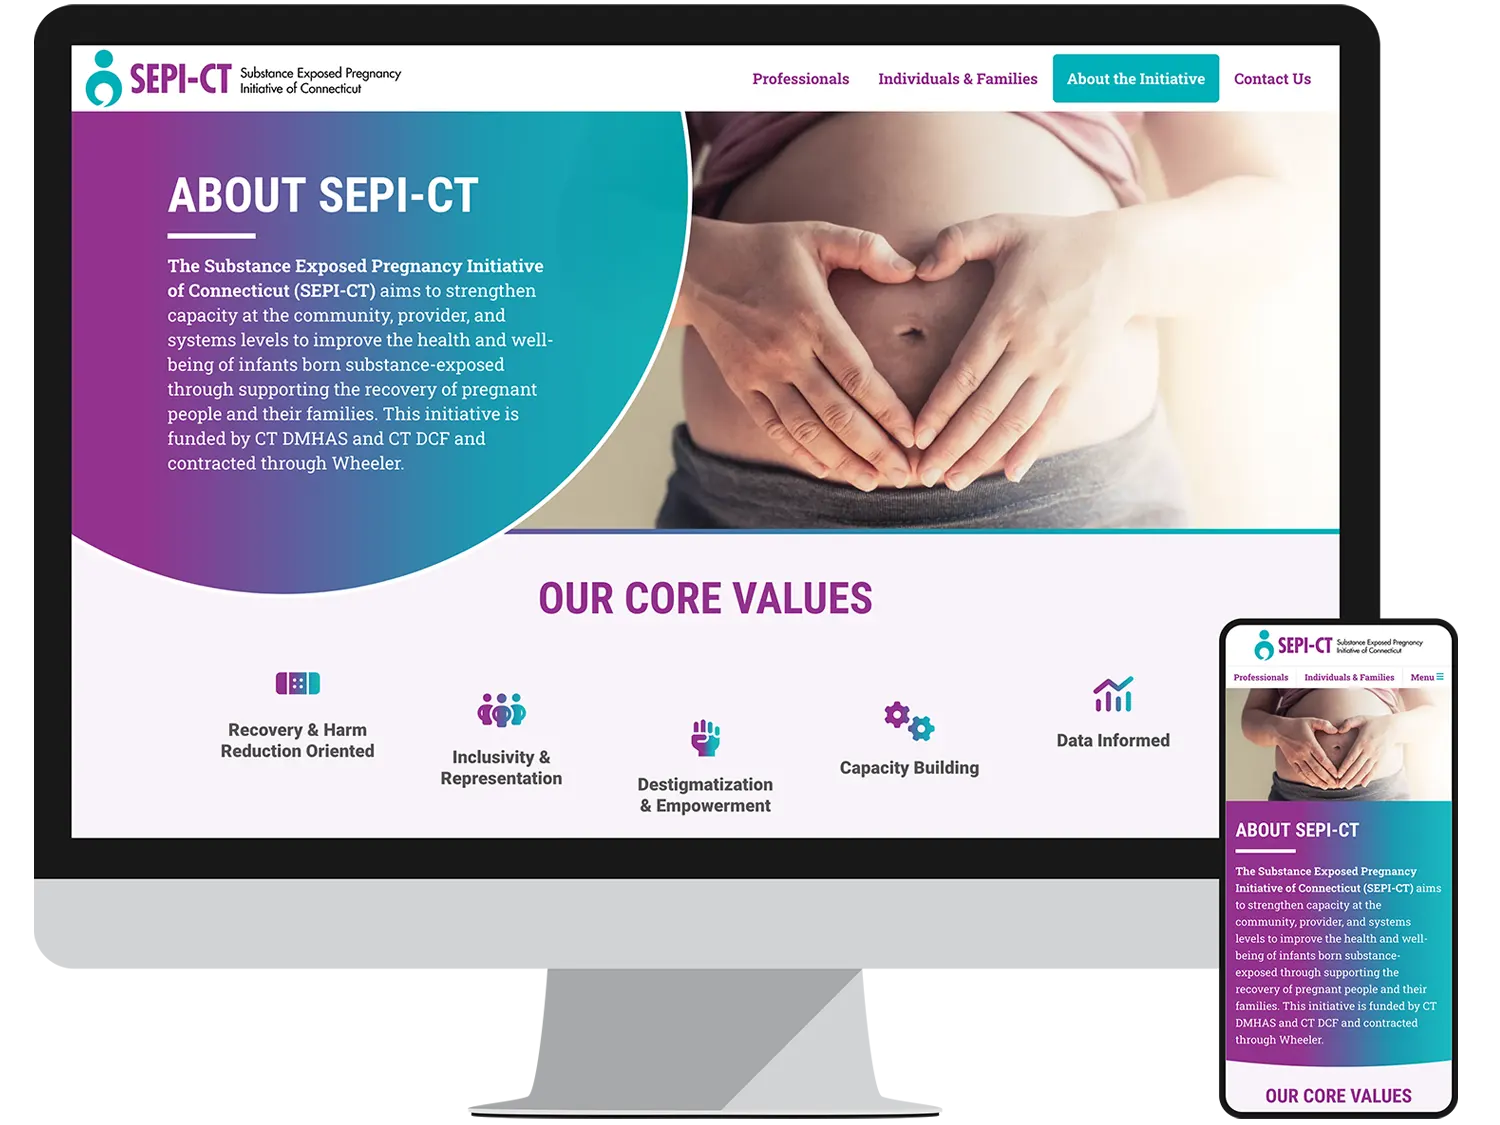 Landing Page - About SEPI-CT